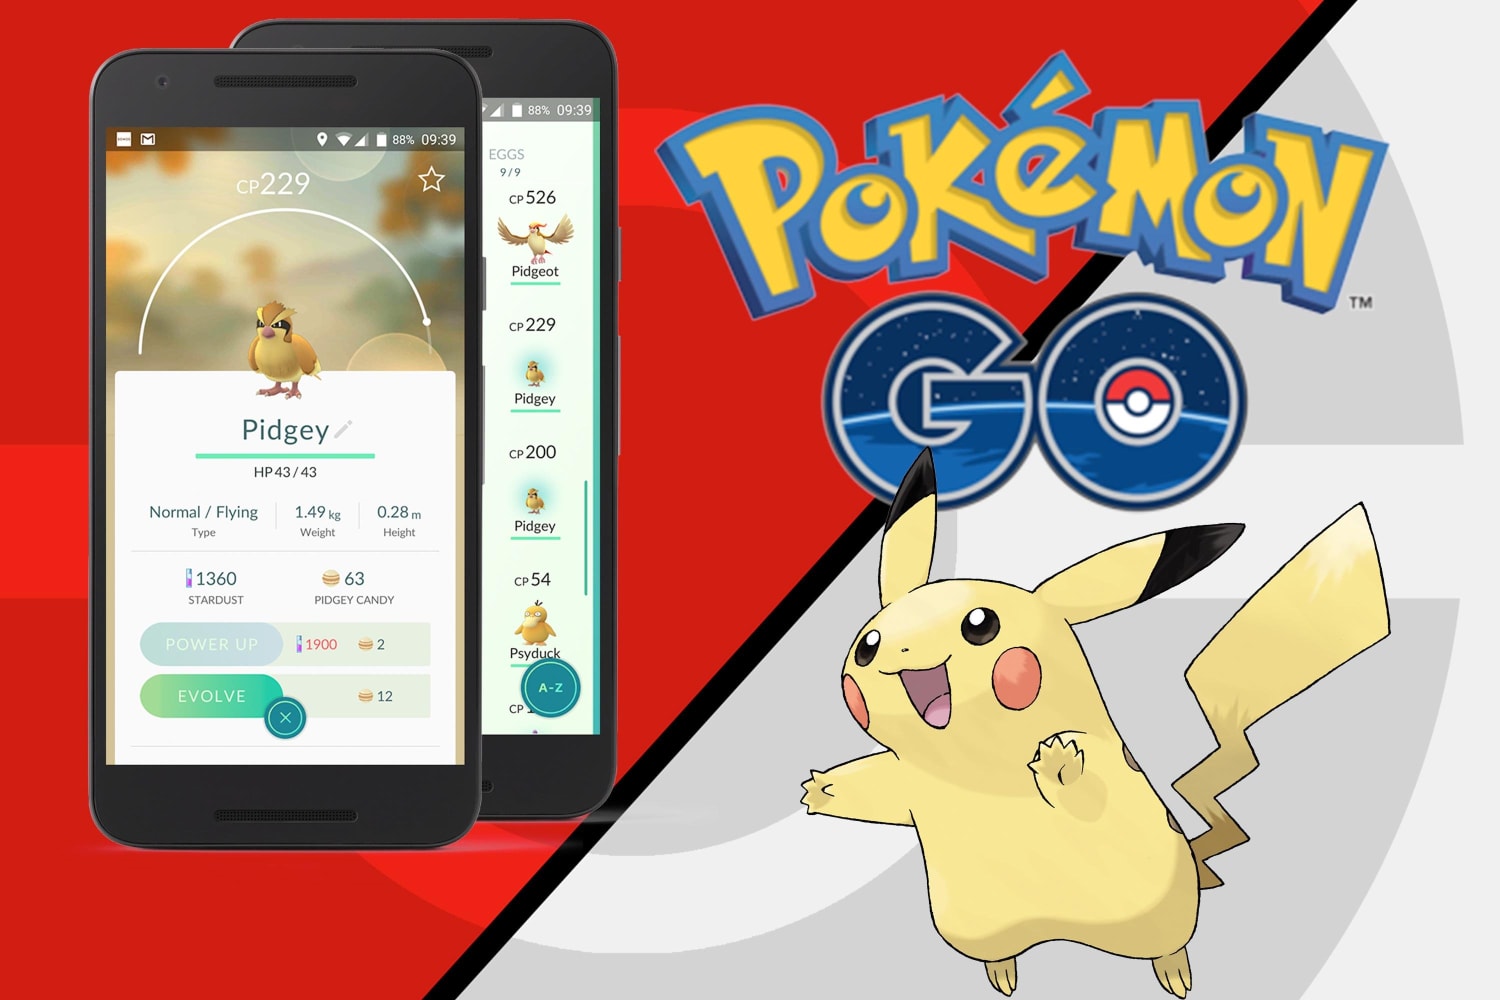 Learn the leading gaming options of Pokemon go 